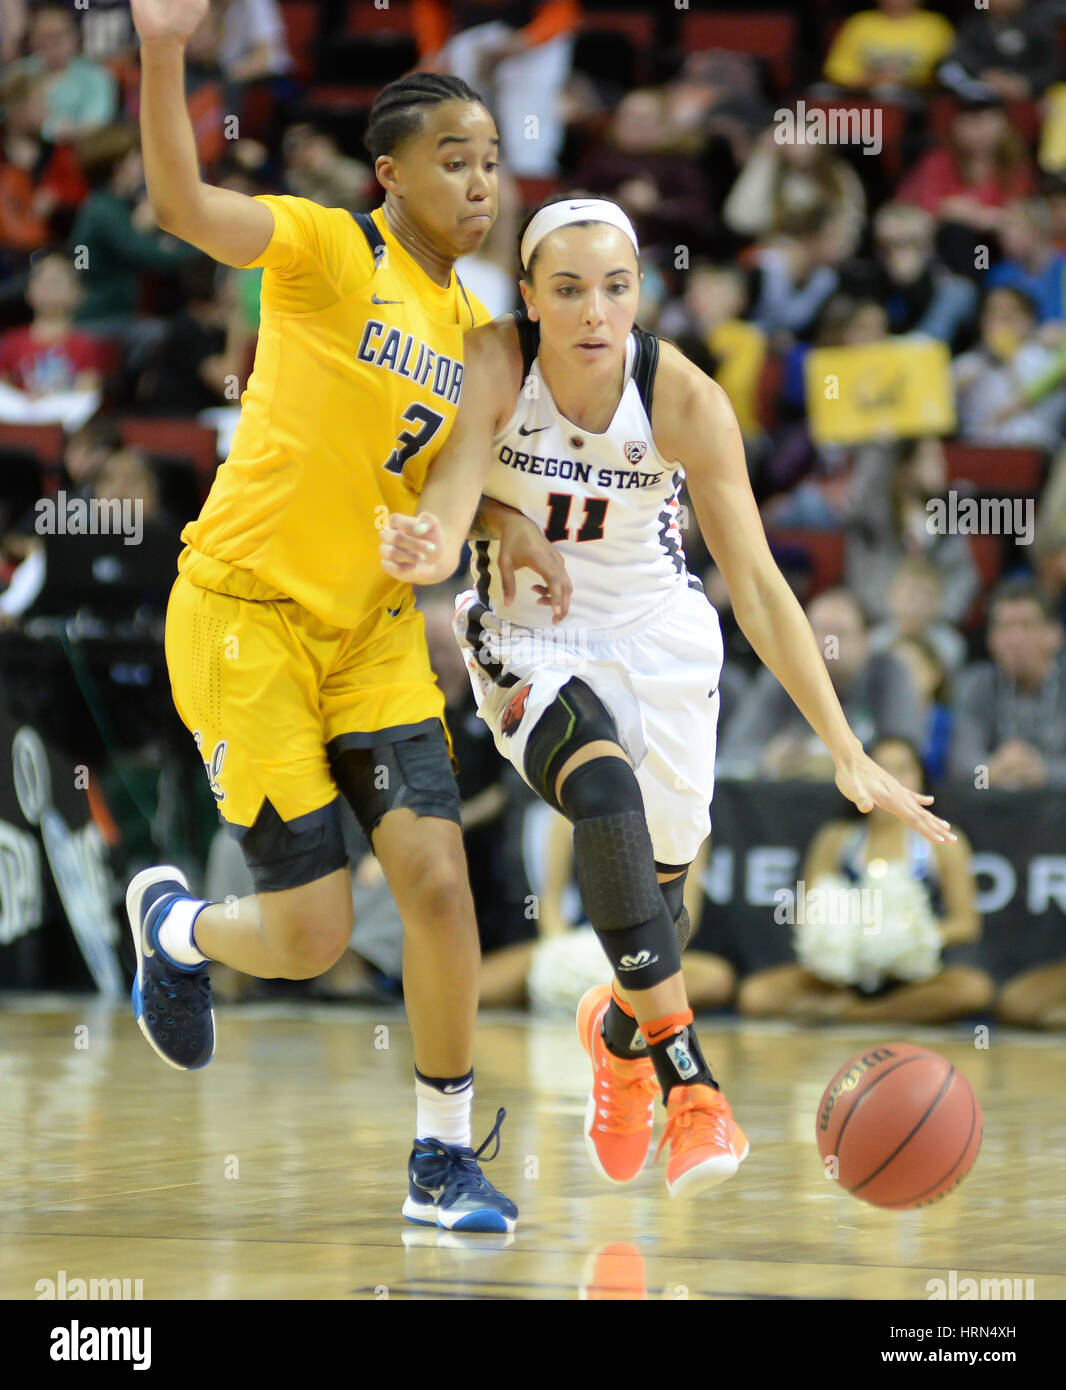 Seattle, WA, USA. 3rd Mar, 2017. Cal's Mikayla Cowling (3) pressures OSU point guard Gabriella Hanson (11) during a PAC12 women's tournament game between the Oregon State Beavers and the Cal Bears. OSU won the game 65-49. The game was played at Key Arena in Seattle, WA. Jeff Halstead/CSM/Alamy Live News Stock Photo